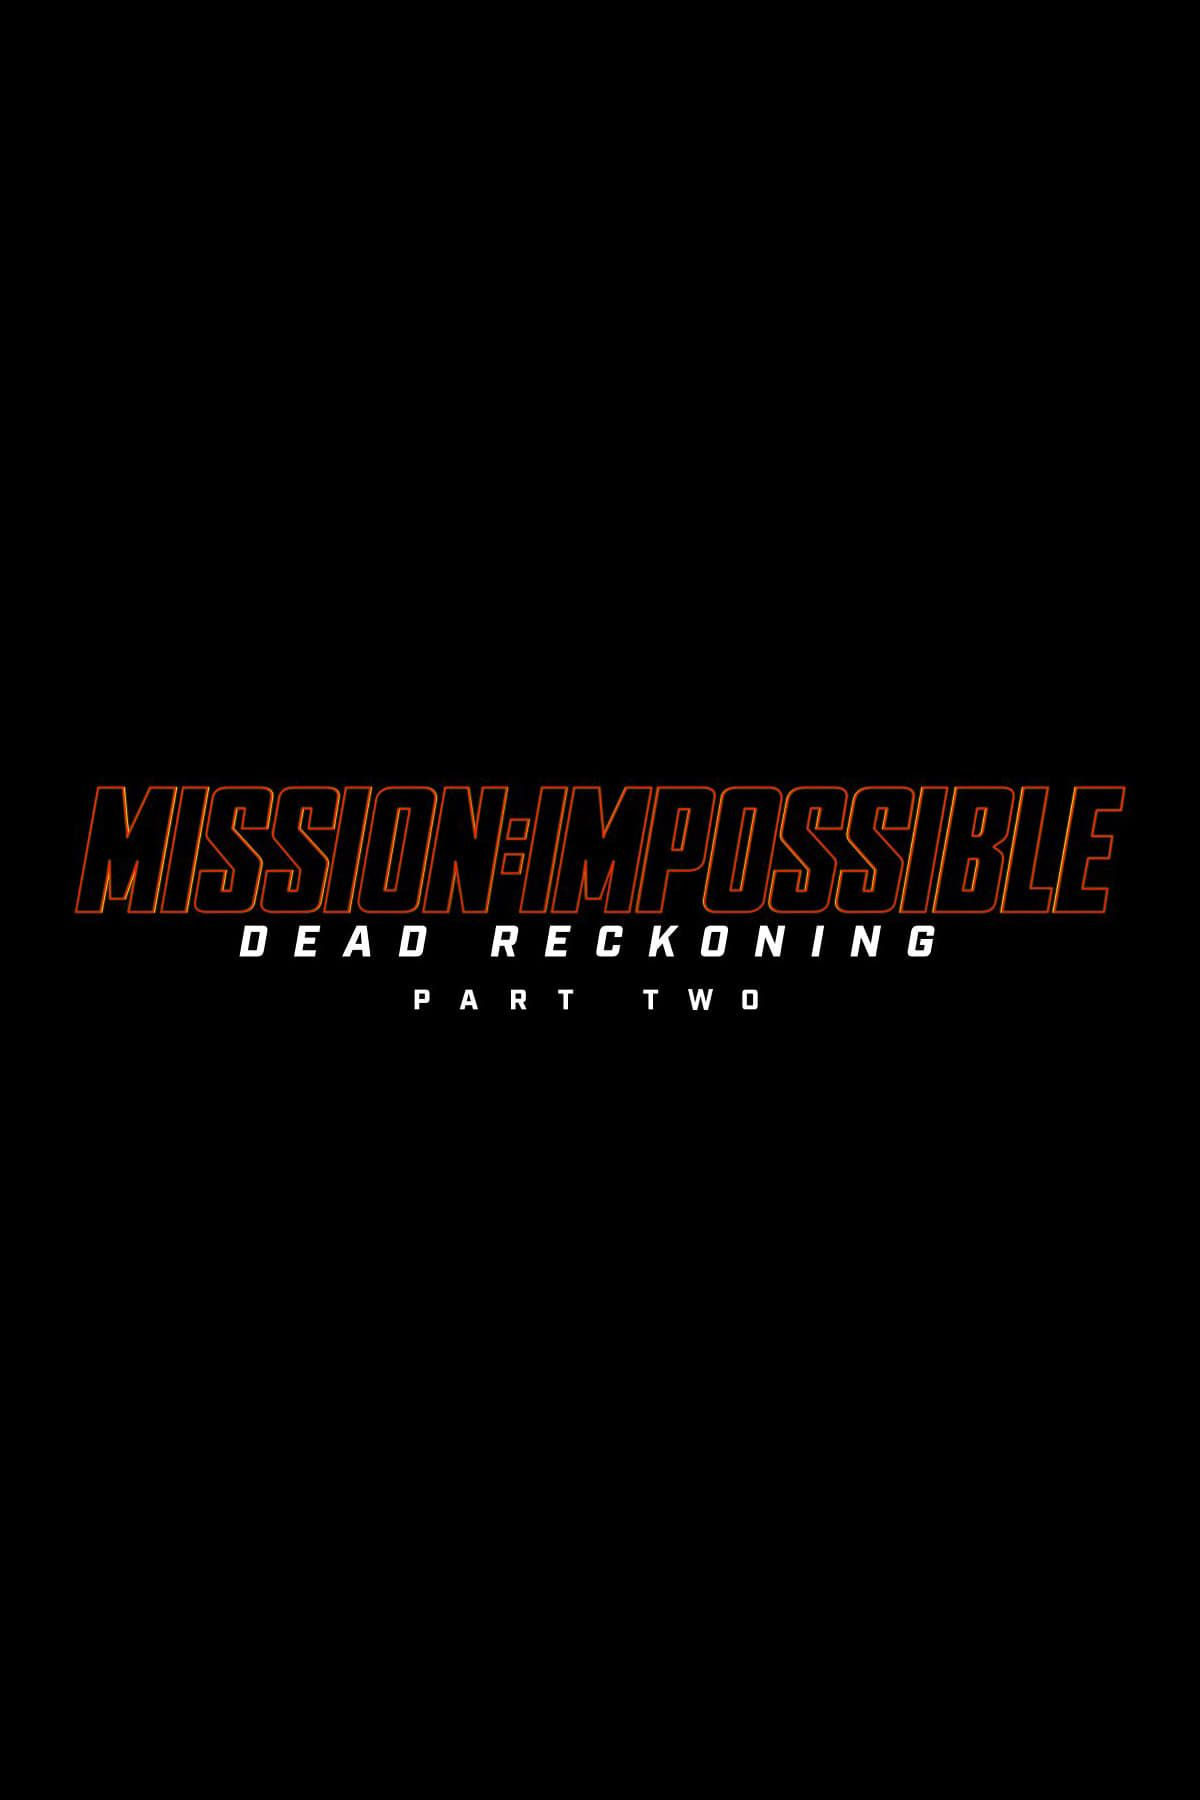 Mission Impossible Dead Reckoning Part Two Film Teaser Poster